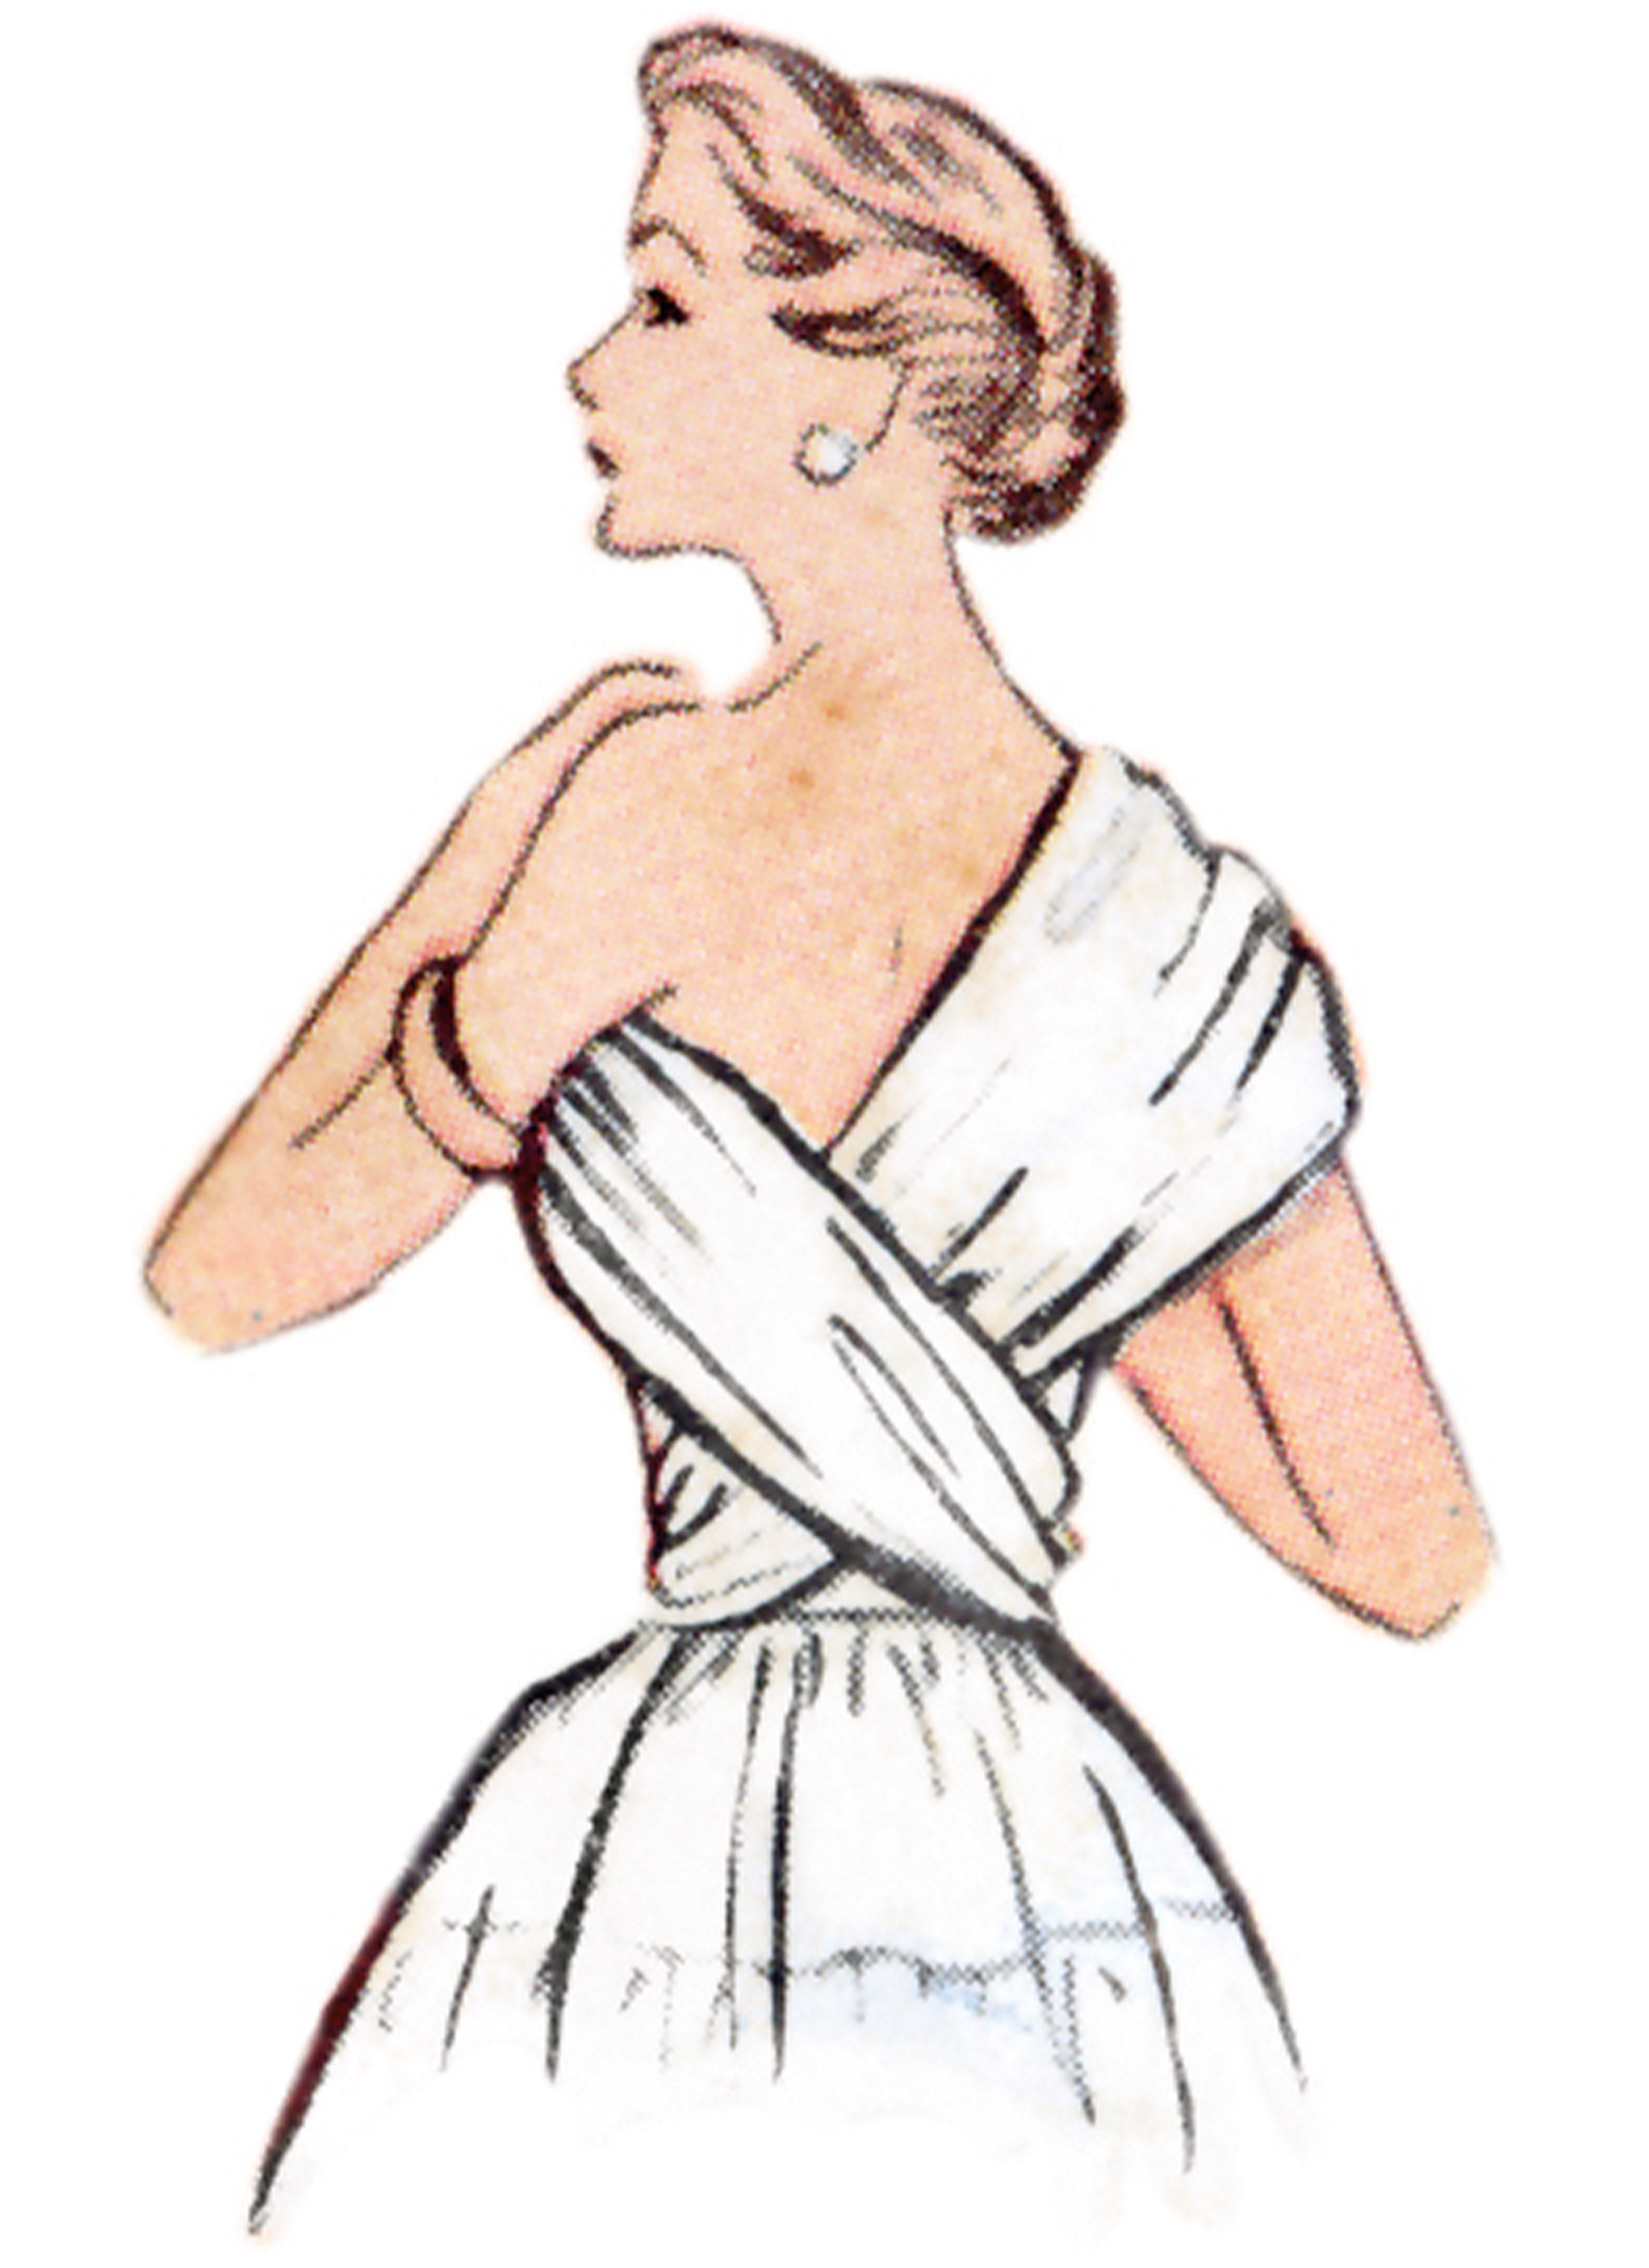 McCalls 8280 Misses' Dresses sewing pattern from Jaycotts Sewing Supplies